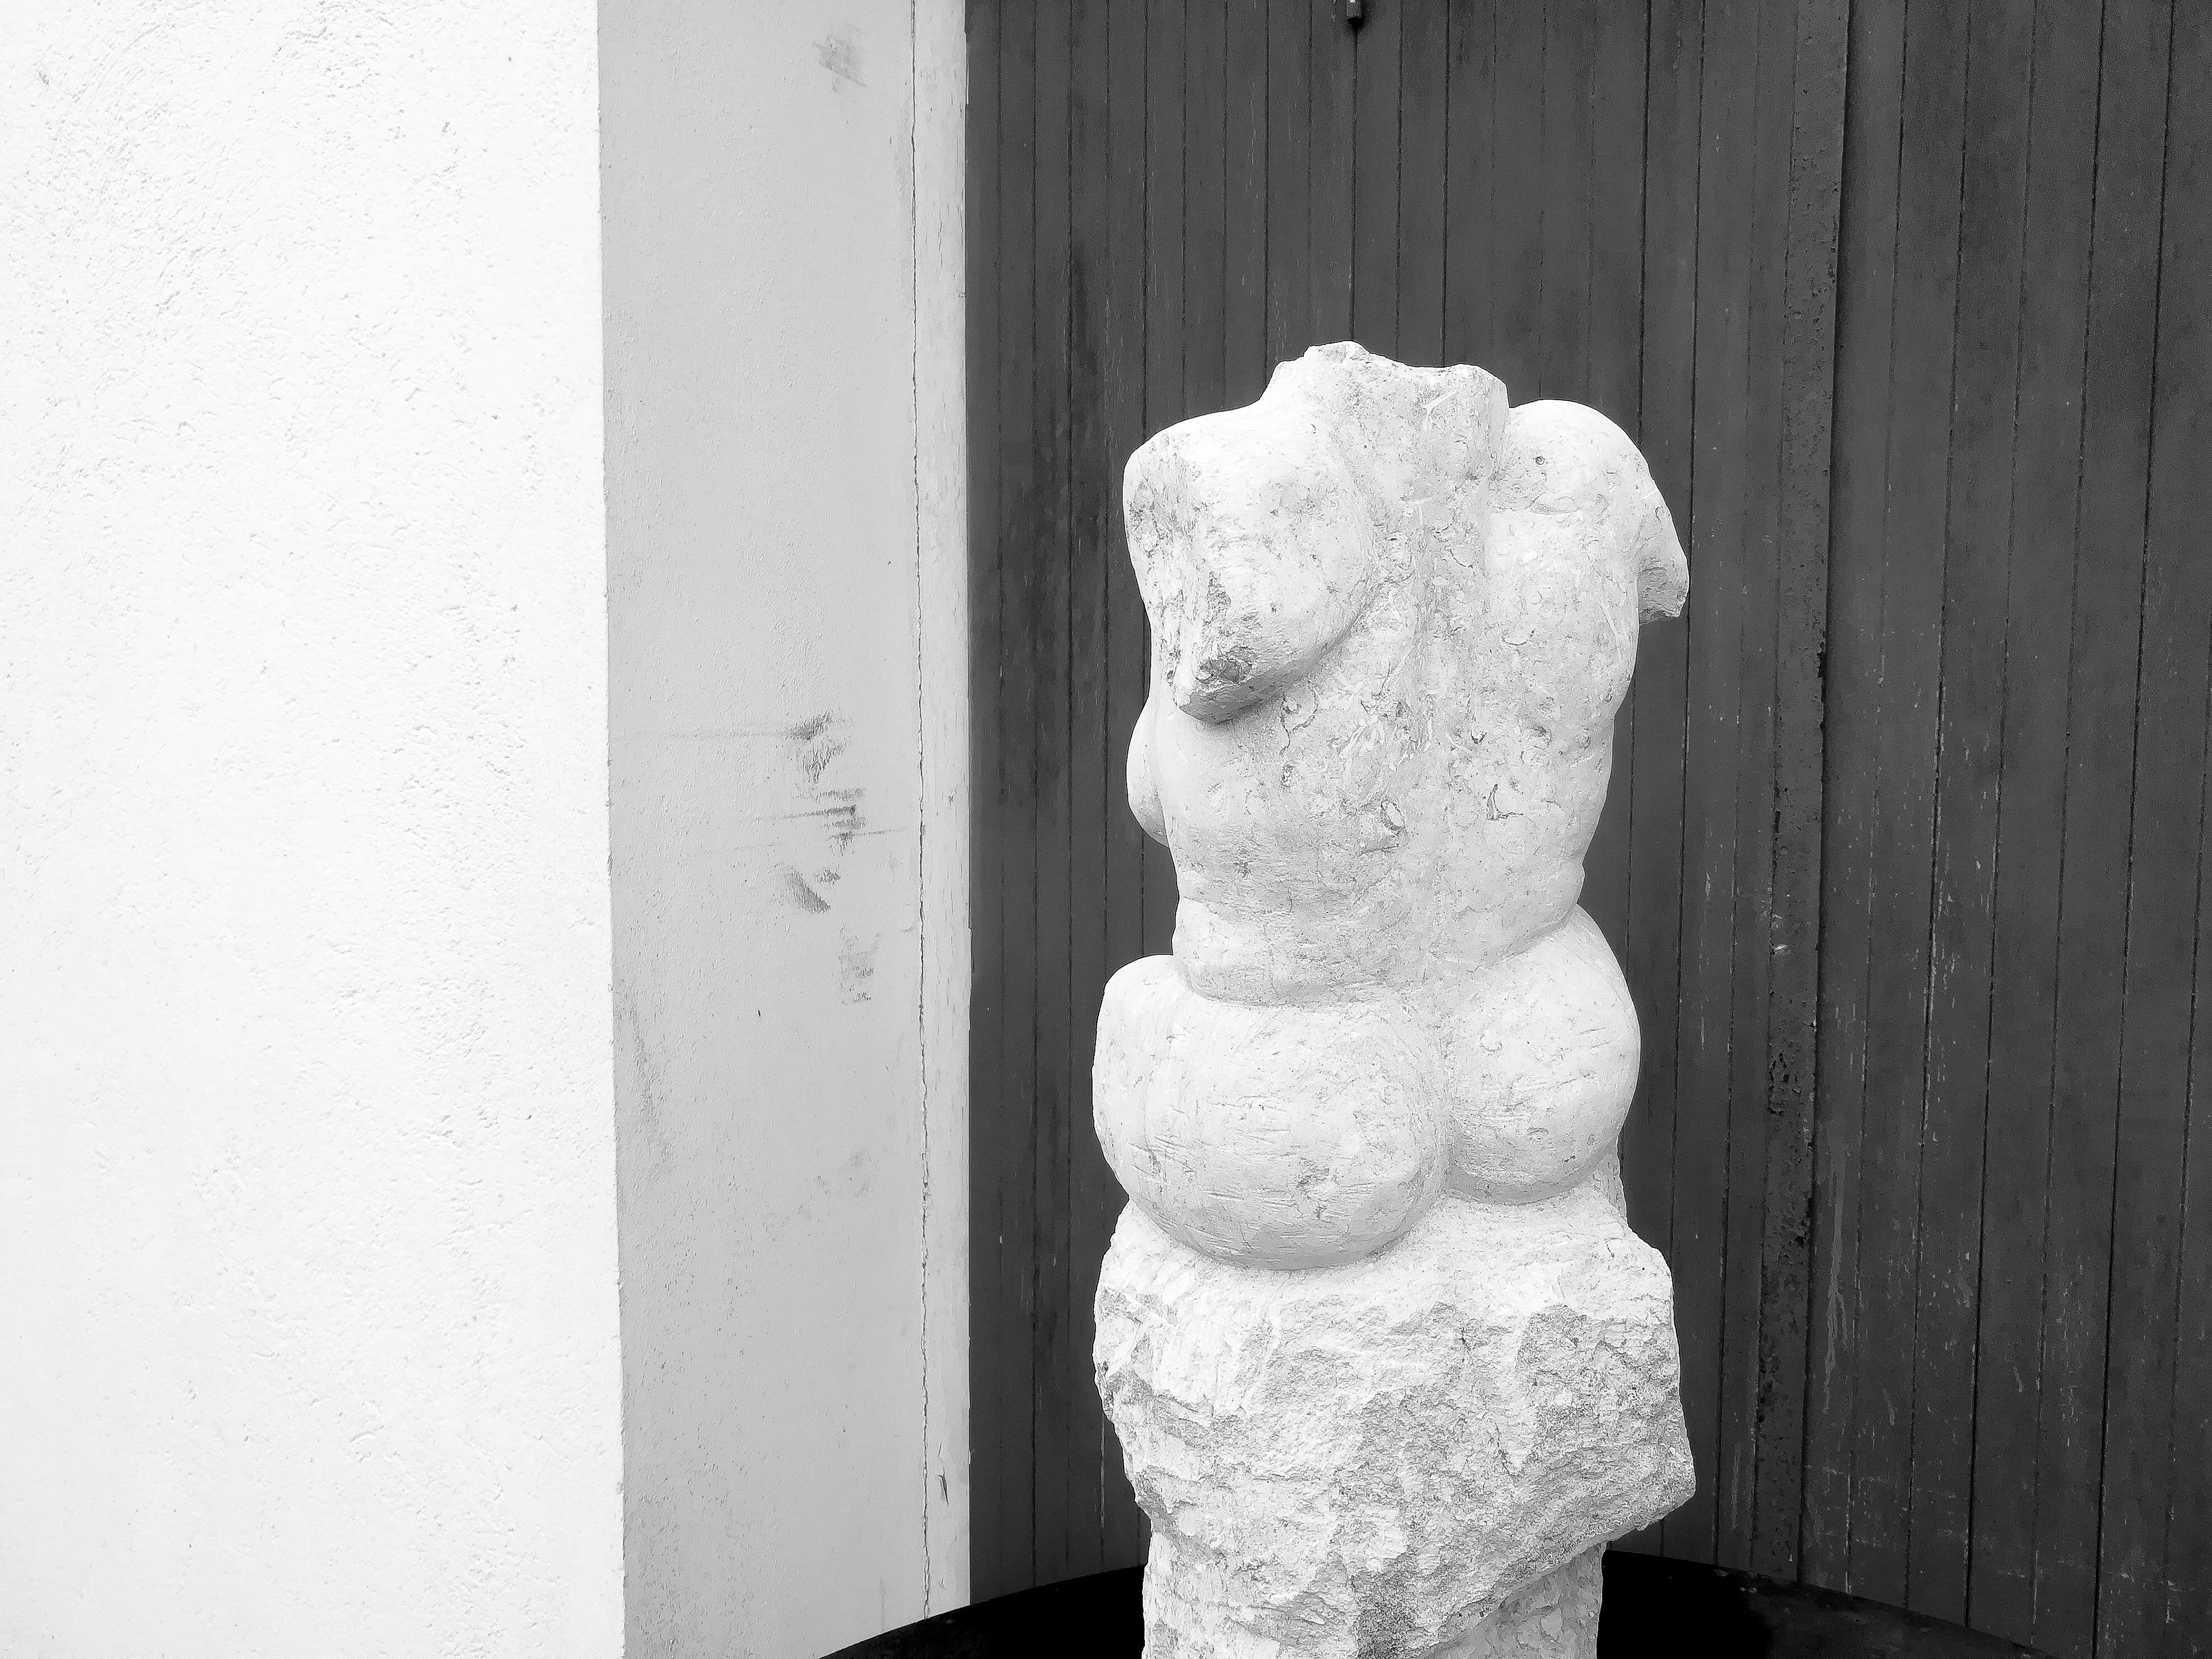 Derose - Baigneuse sur un rocher - Original Sculpture
Dimensions: L 50.8 x  D 50.8 x H 152.4
Materials: Limestone of Perigord

Visual artist and writer from Nouvelle-Aquitaine, DEROSE live and work in Paris since 2015.
At the heart of his workshop